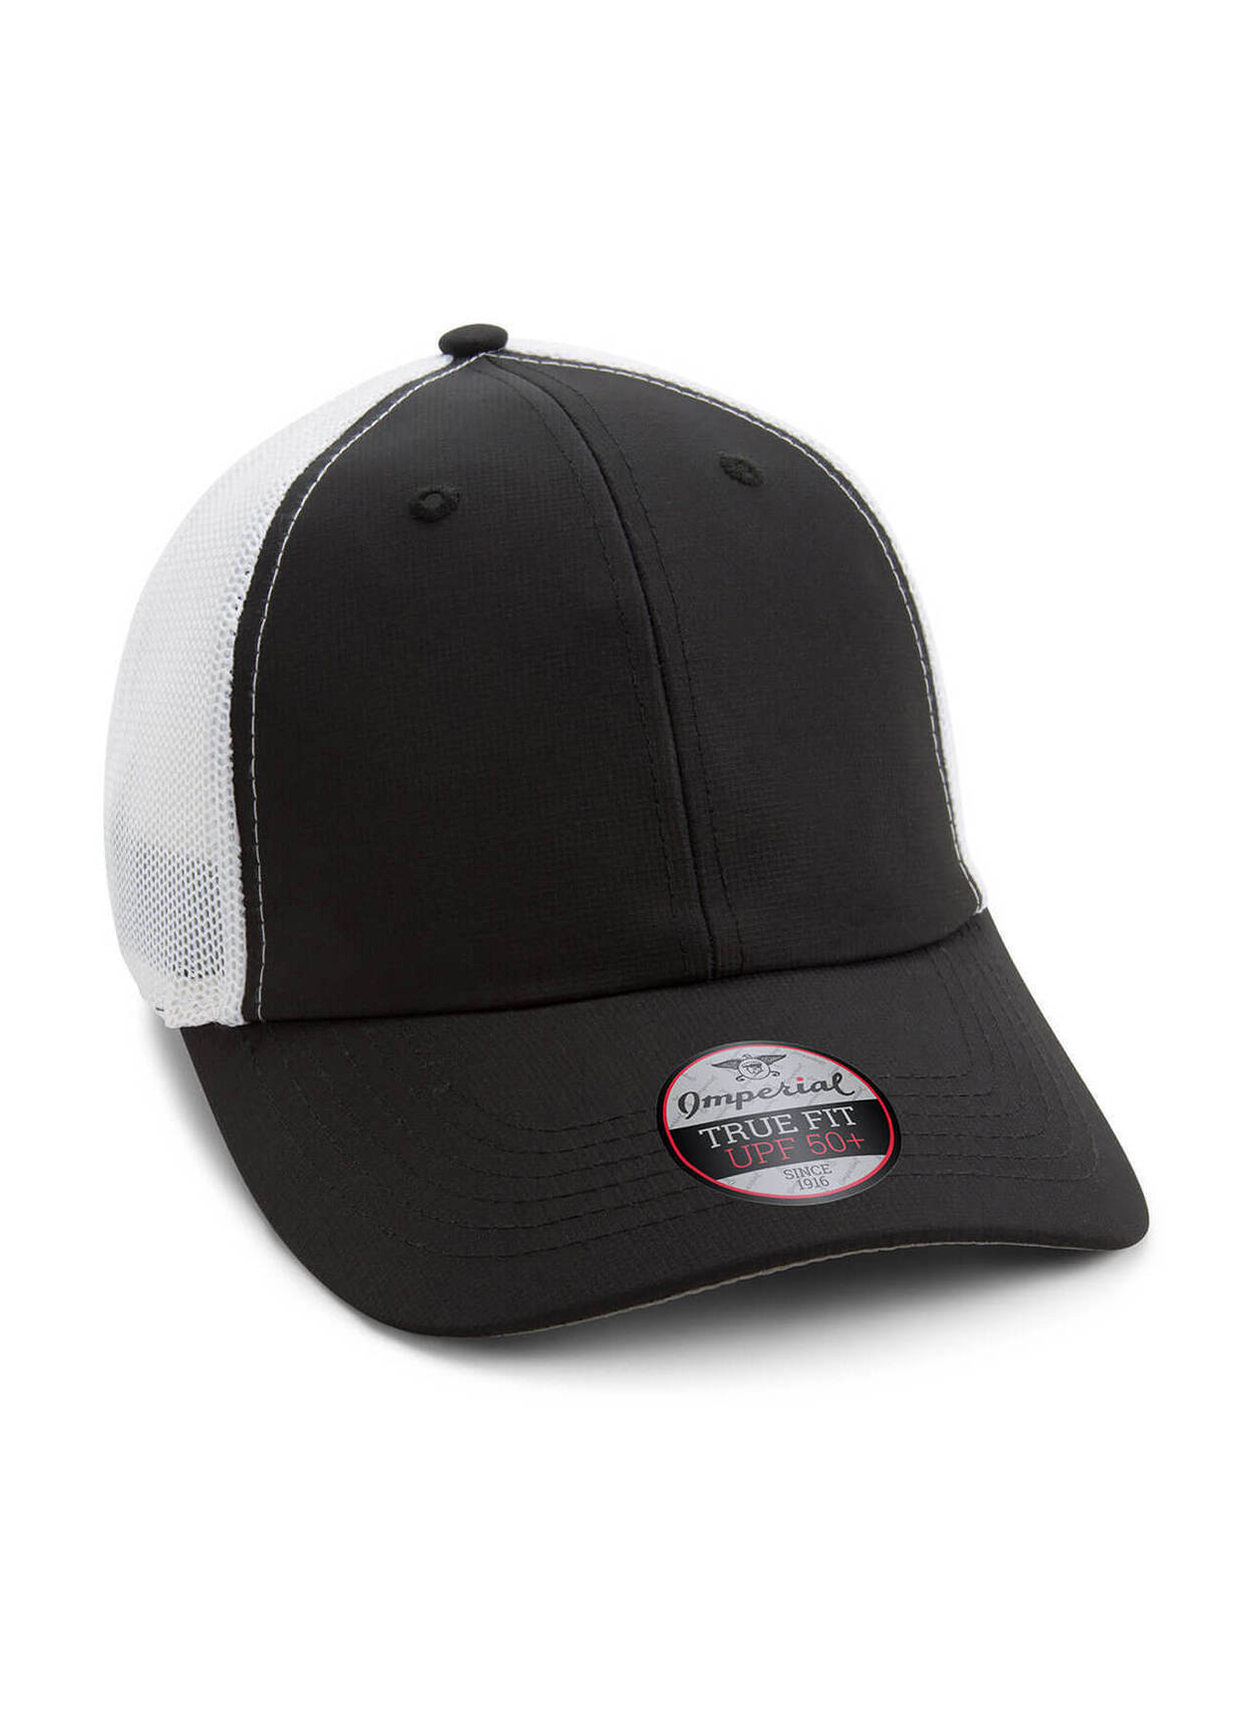 Imperial Black / White Structured Performance Meshback Hat